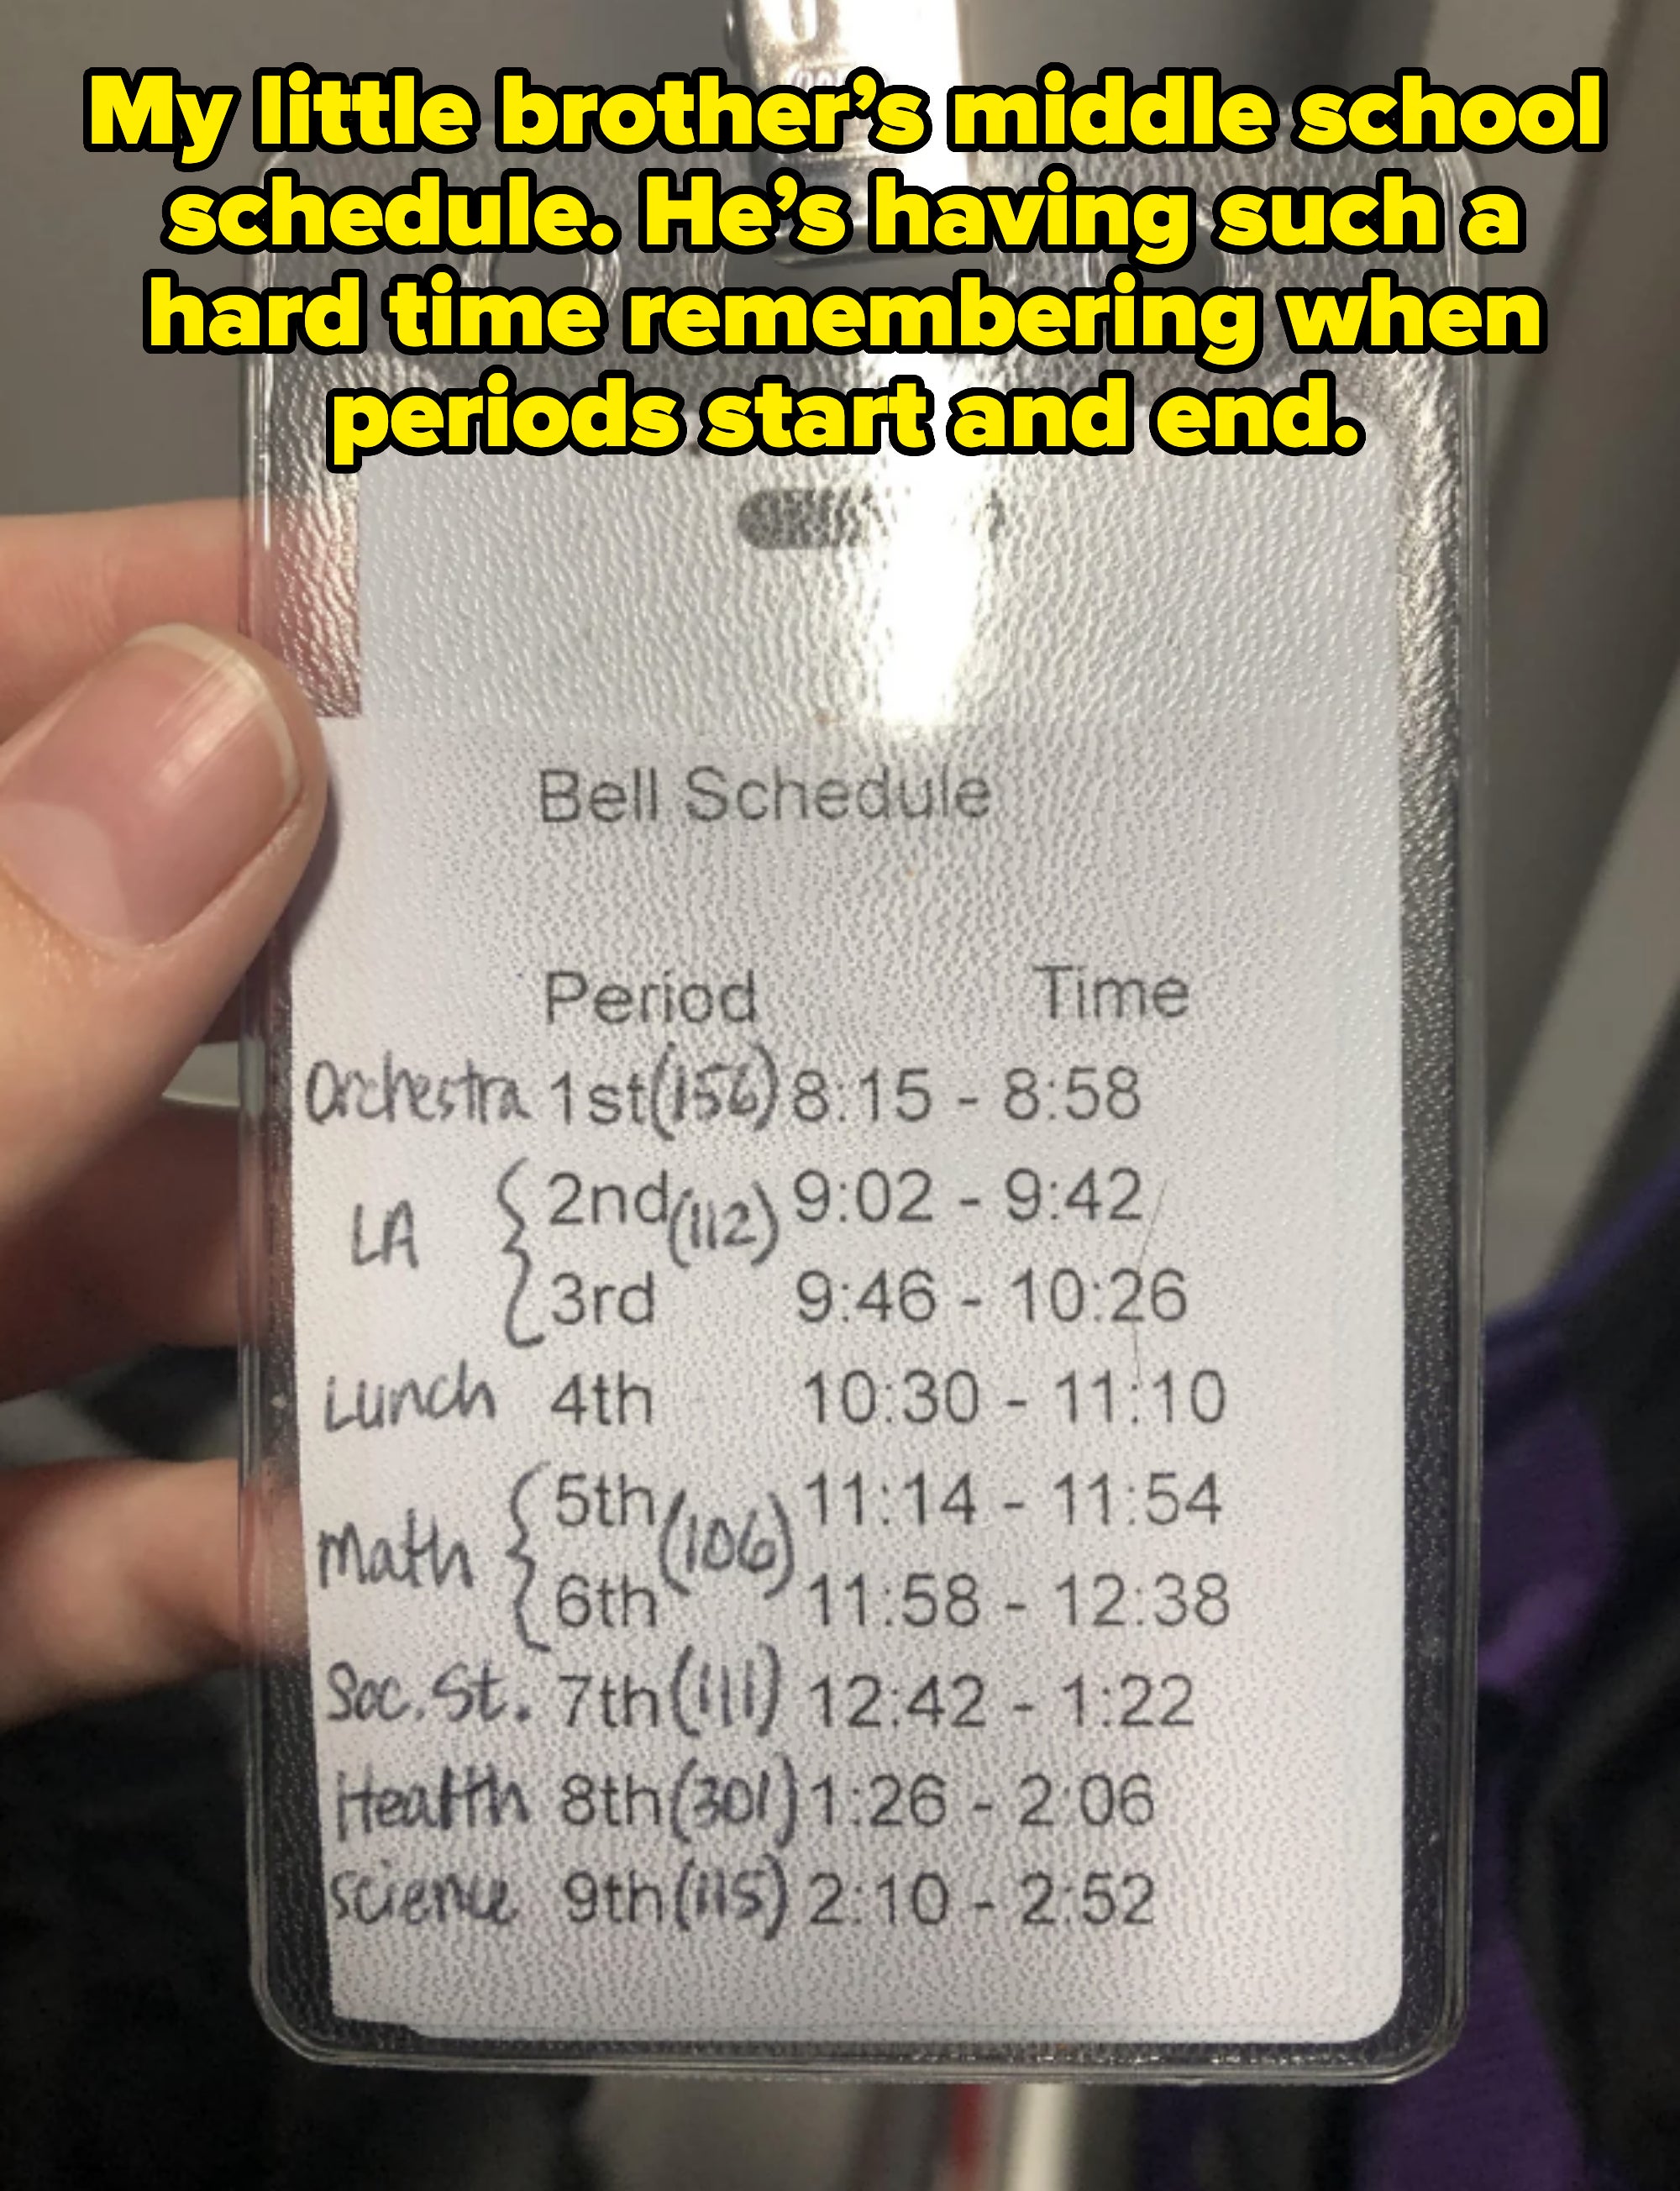 A hand holds a school ID card displaying a bell schedule. Periods include Orchestra, Language Arts, Lunch, Math, Social Studies, Health, and Science, with respective times